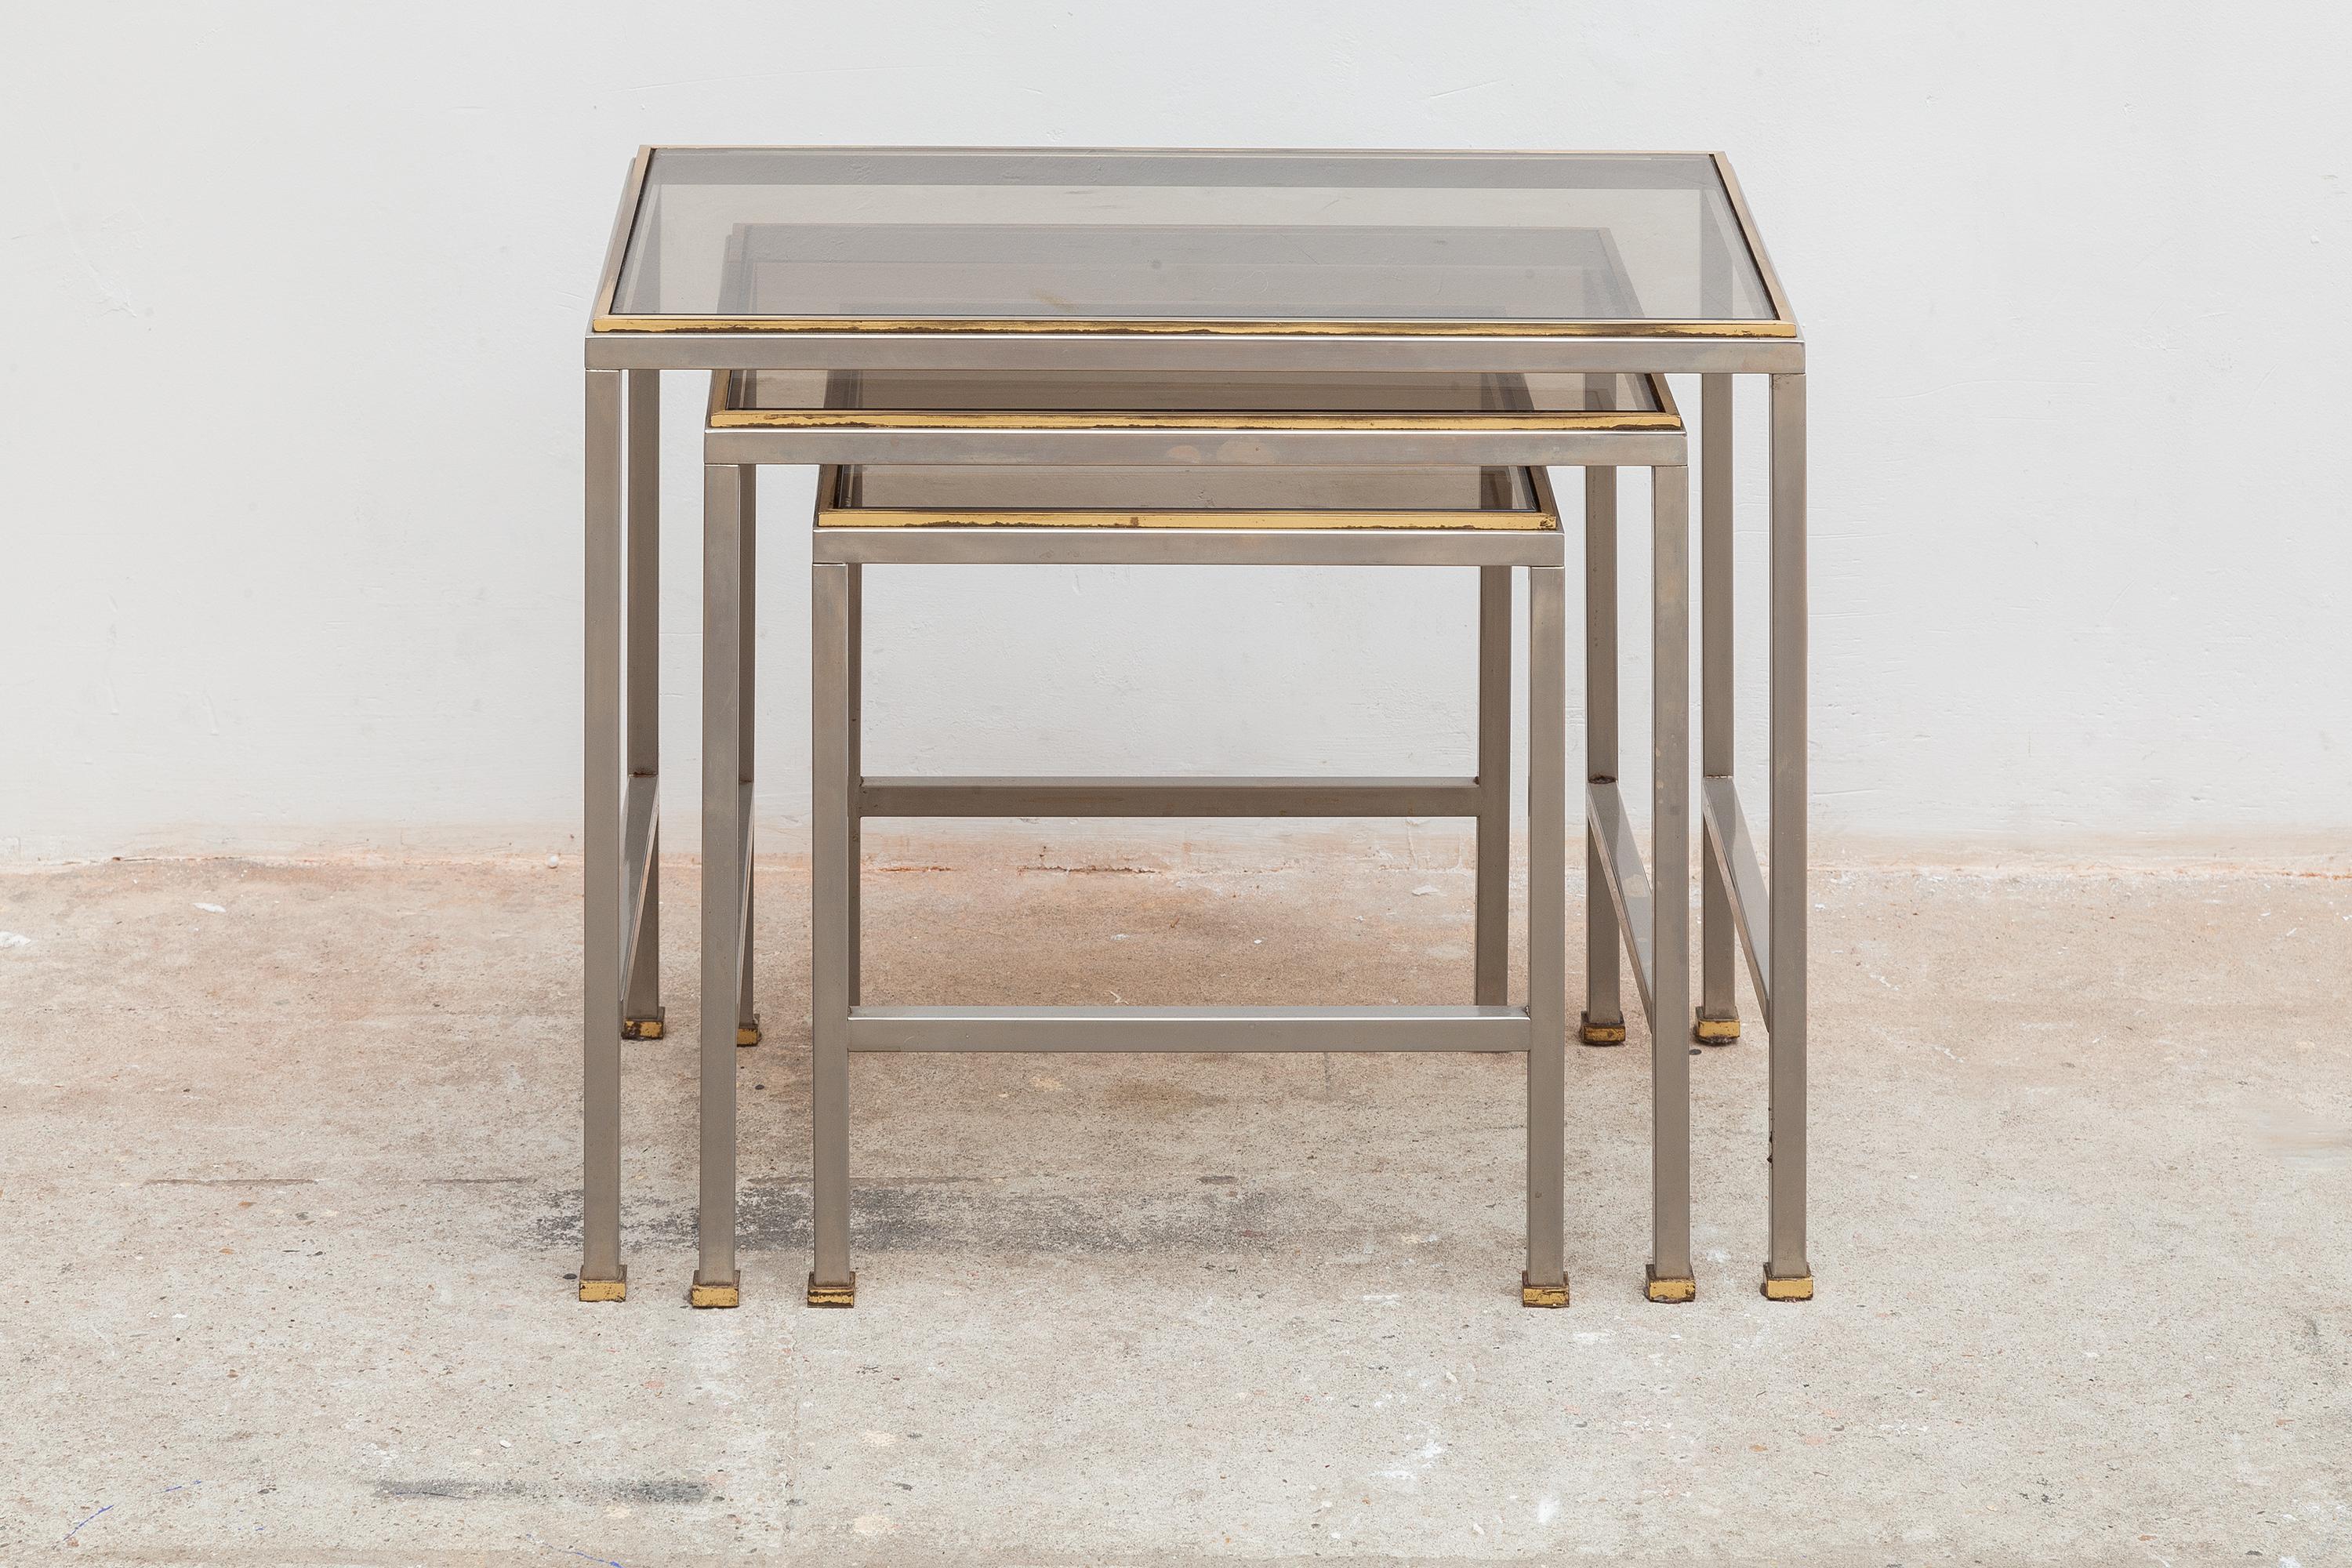 Elegant nest of three modernist tables in silver and brass tone frames with smoked glass tops designed by Guy Lefevre for Maison Jansen, 1970s.
Dimensions: Small 32 W x 34 H x 32 D cm, Med: 42 W x 38 H x 32 D cm, large: 52 W x 42 H x 32 D cm.